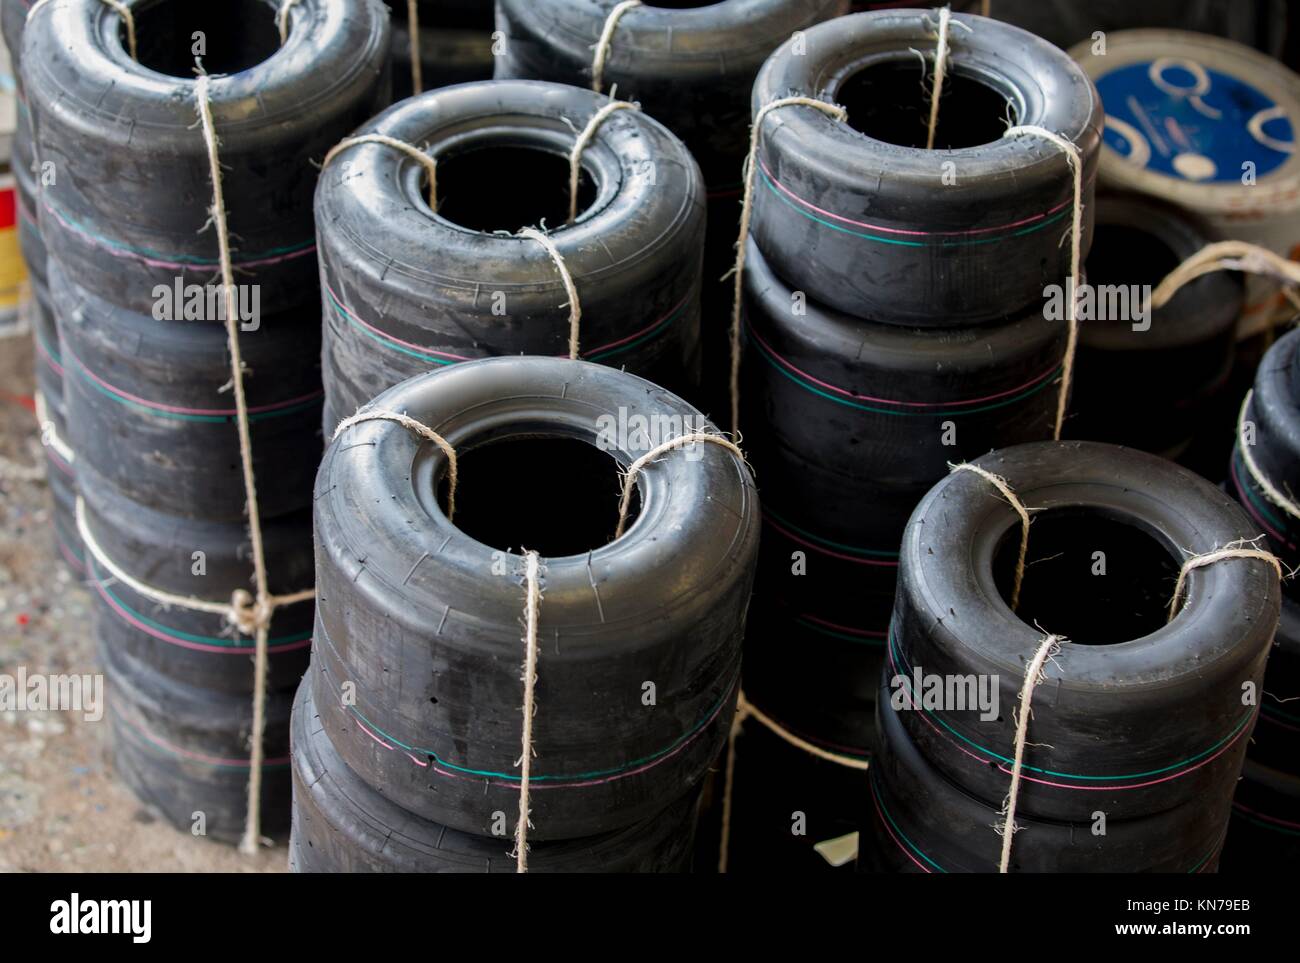 Loads of new karts wheels tires unpacked. Stock Photo